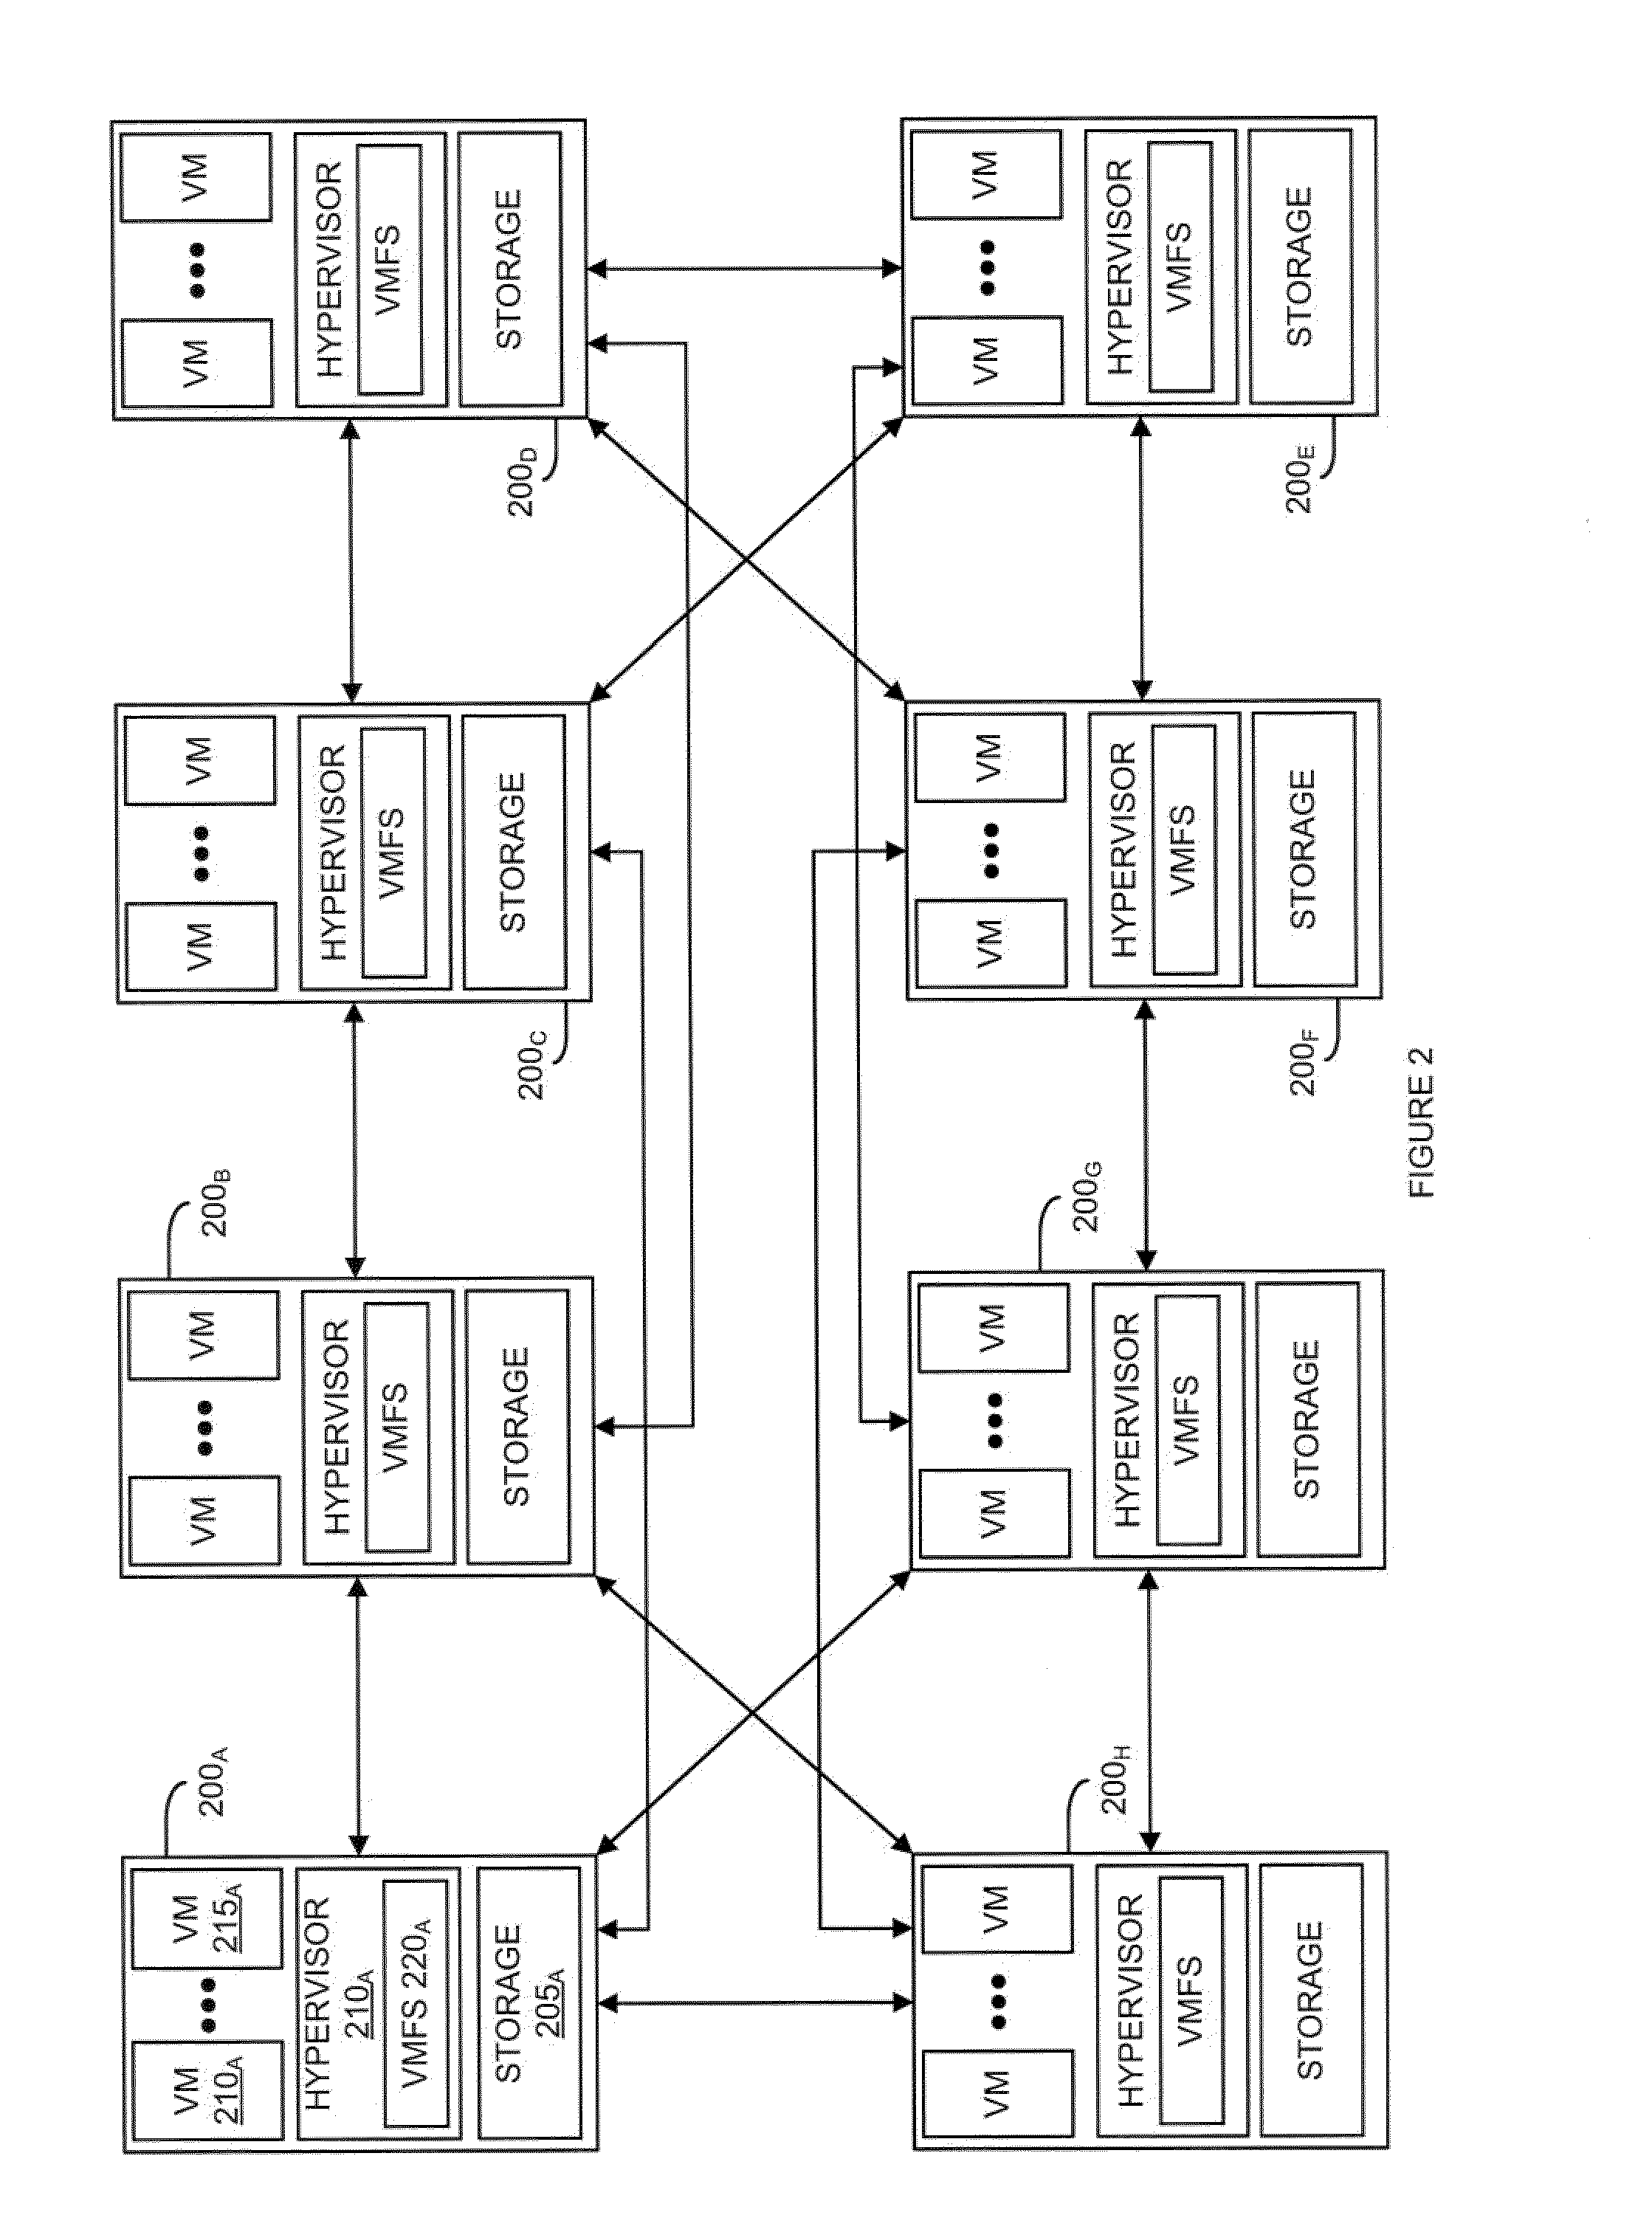 Method and System for Locating Update Operations in a Virtual Machine Disk Image